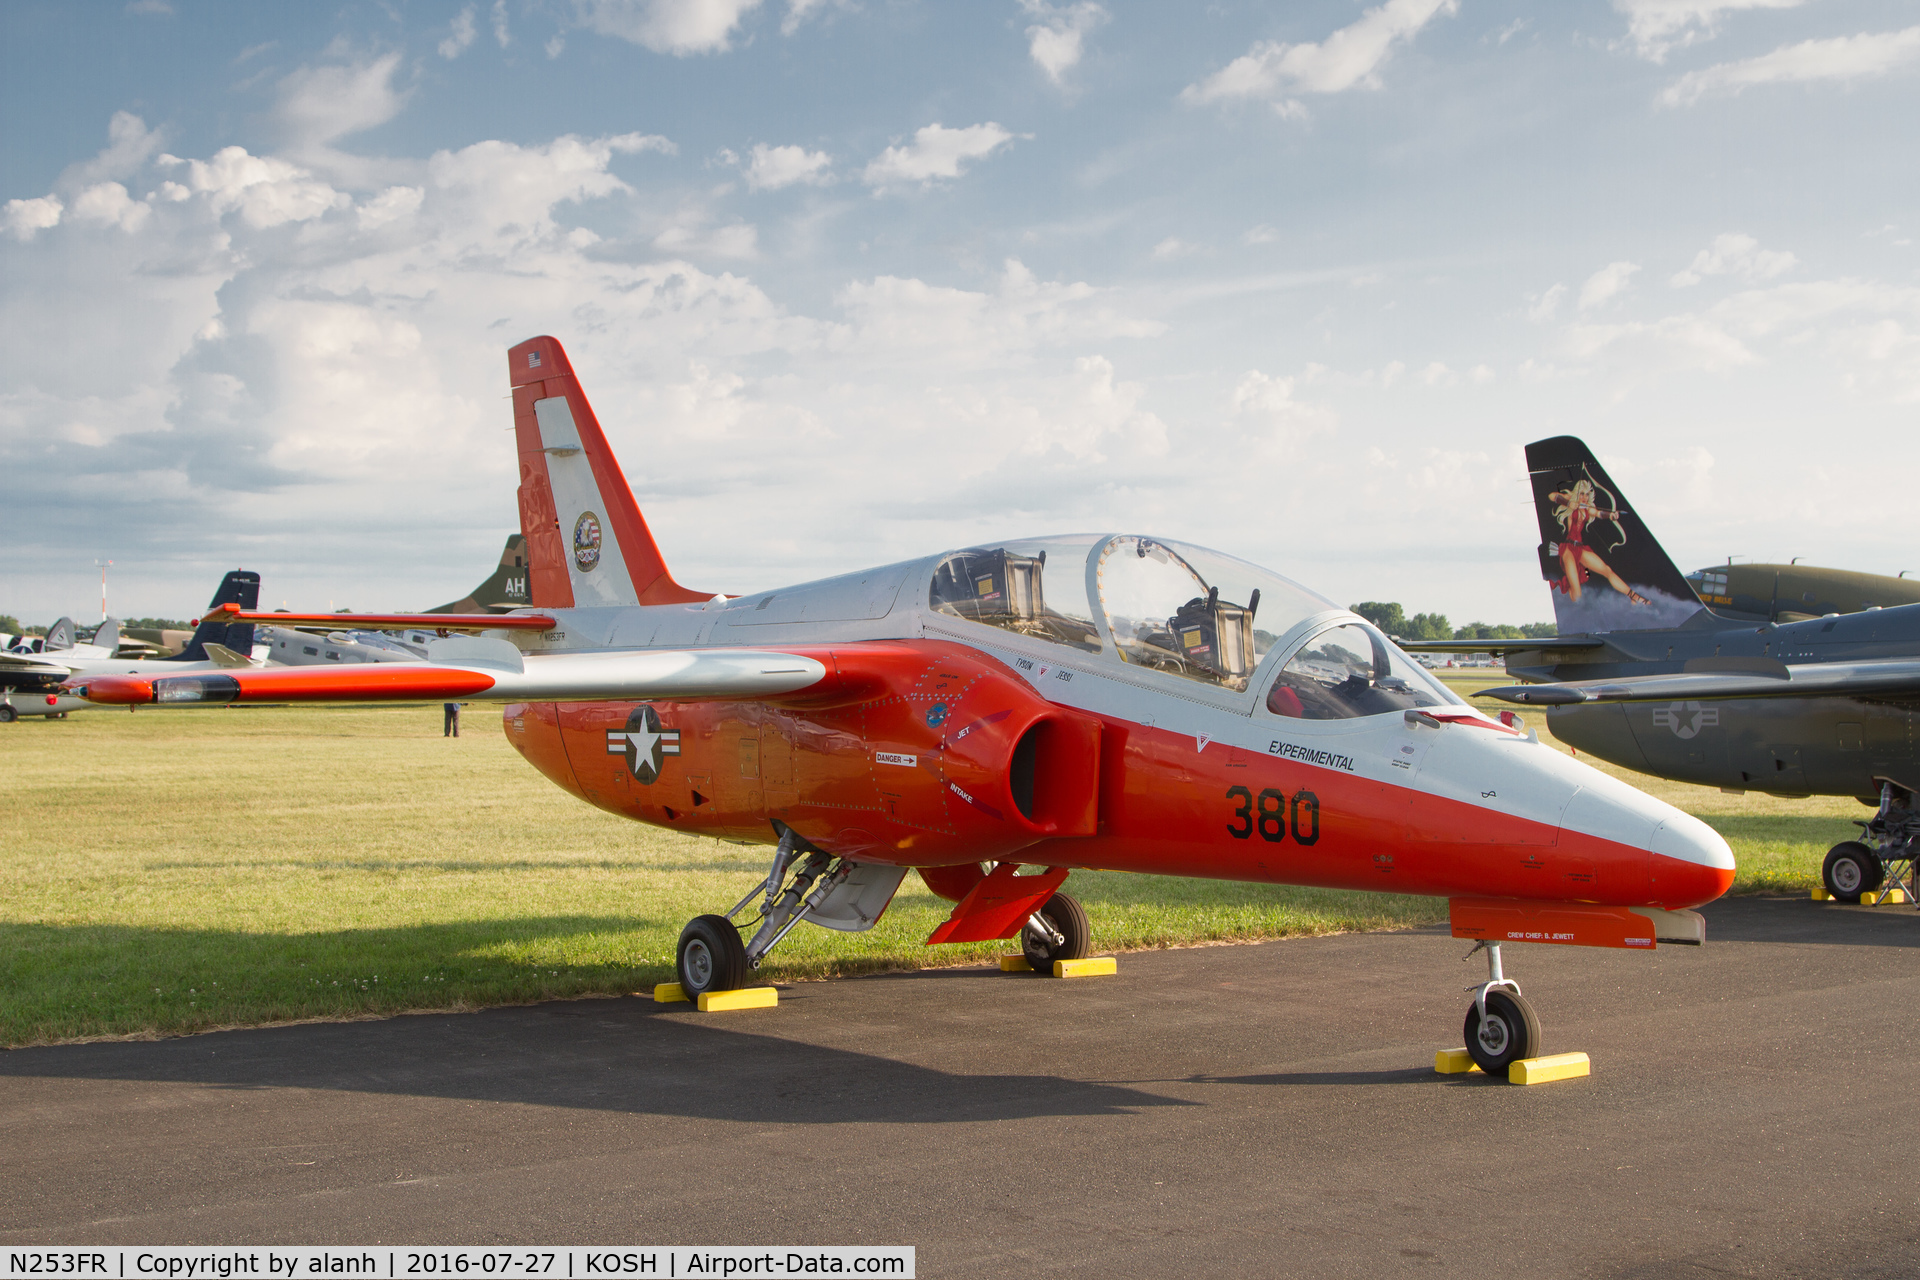 N253FR, 1985 SIAI-Marchetti S-211 C/N 004/02-001, In the warbird park at AirVenture 2016